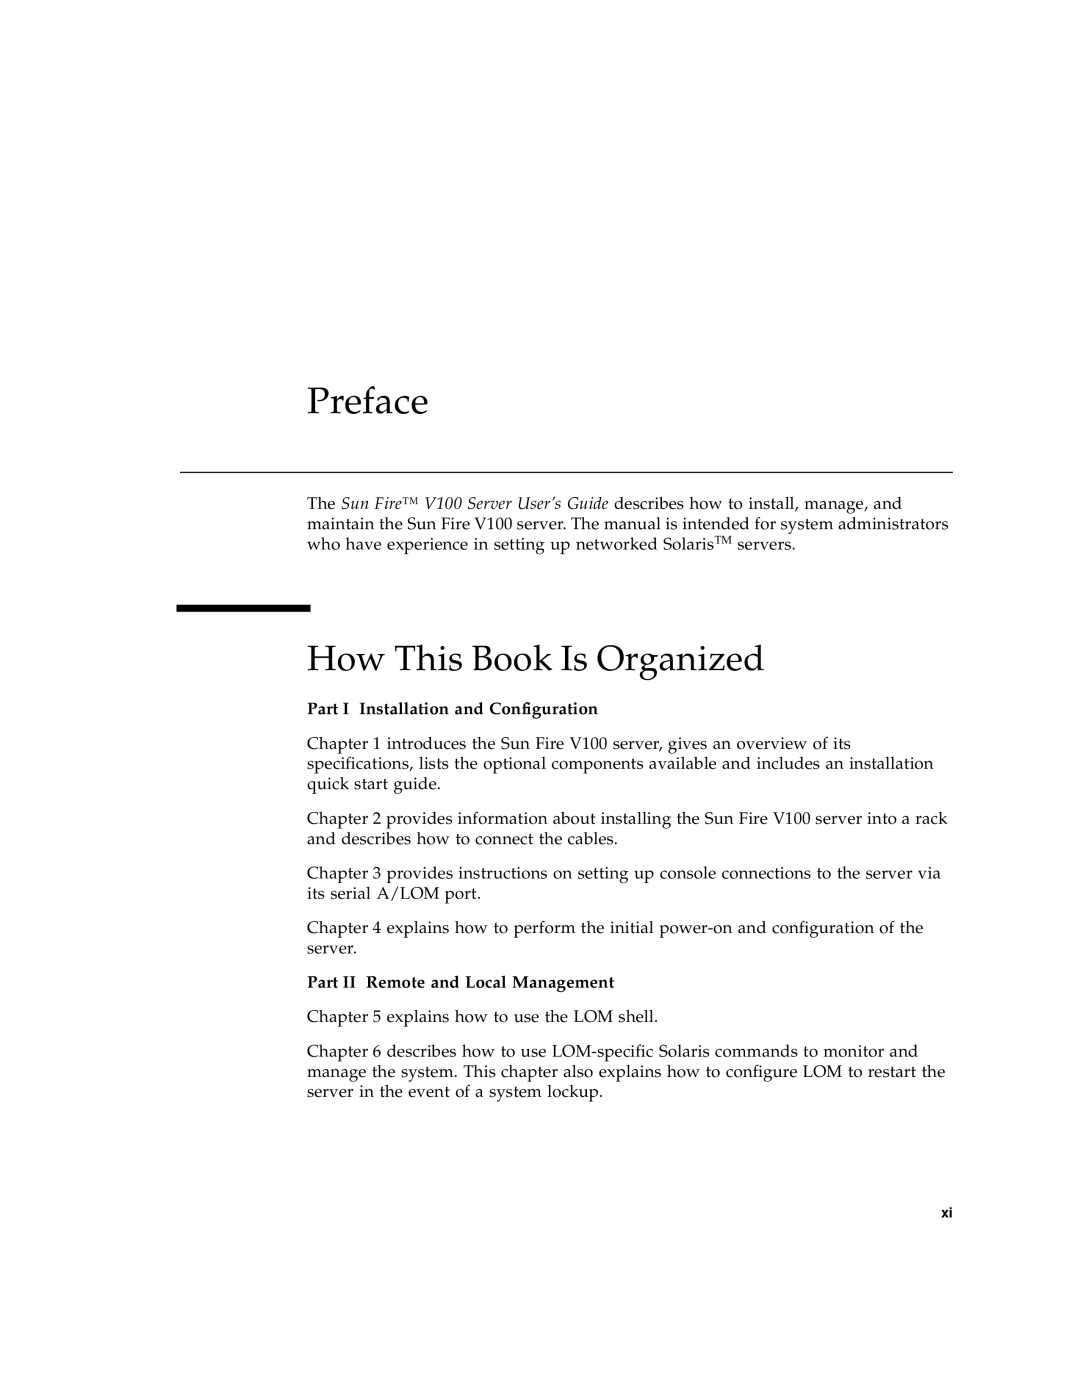 Sun Microsystems Sun Fire V100 manual Preface, How This Book Is Organized, Part I Installation and Configuration 